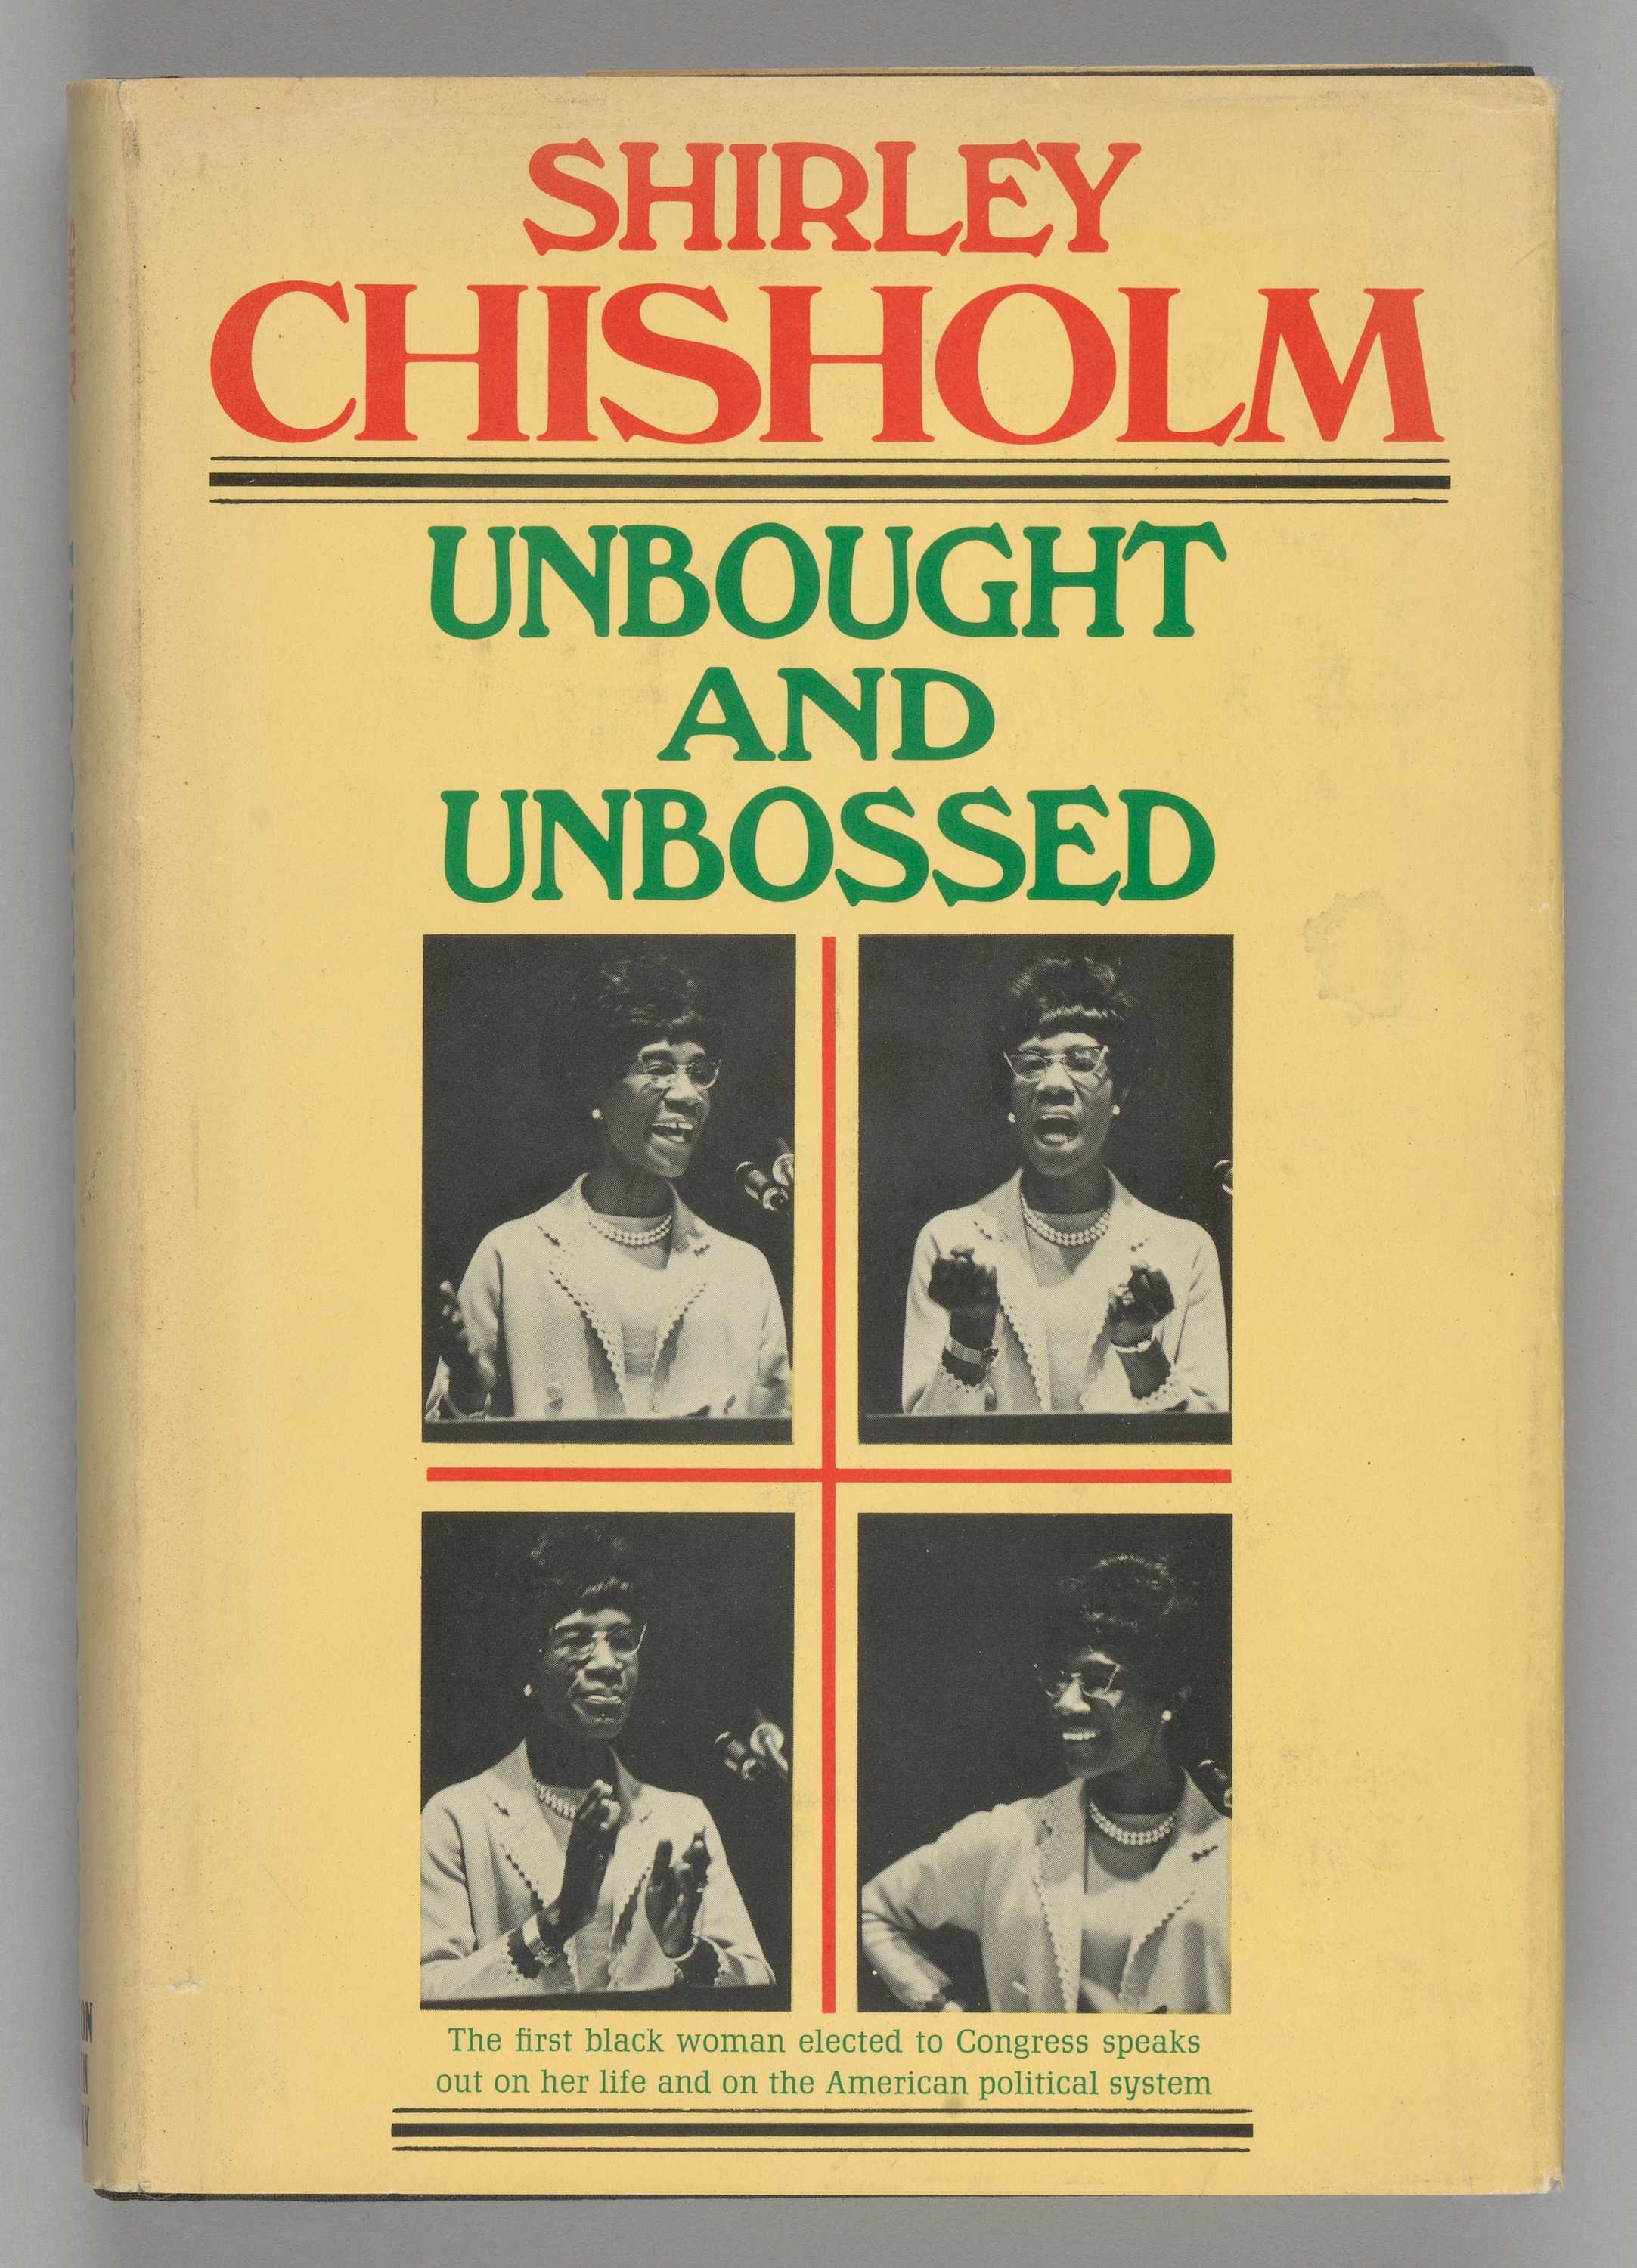 A hardback book titled Unbought and Unbossed by Shirley Chisholm. The exterior cover had a paper book cover and a clear plastic book cover over that. The paper book cover is yellow with red and green text, centered, that reads: [SHIRLEY / CHISHOLM / UNBOUGHT / AND / UNBOSSED]. Underneath the main text, there are four black-and-white images of Shirley Chisholm speaking and gesturing with her hands. Green text, centered, below the images, reads: [The first black woman elected to Congress speaks / out on her life and on the American political system]. The binding reads, written vertically in red and green text reads: [SHIRLEY / CHISHOLM], [UNBOUGHT AND UNBOSSED]. Black text, written horizontally, reads: [HOUGHTON / MIFFLIN / COMPANY]. The back cover of the paper sleeve, in red text at the top, reads: [SHIRLEY / CHISHOLM]. Underneath in green text reads: [SPEAKS OUT ON]. The cover then lists various topics (in green text) and a blurb about each (in black text) underneath, aligned to the left. The front and back interior of the paper cover sleeve have a synopsis of the book continuing on both. The hardback cover itself is navy blue or black with the same colored type, and brown front and back interior covers. The interior pages, 177 pages in total, are off-white with black type.